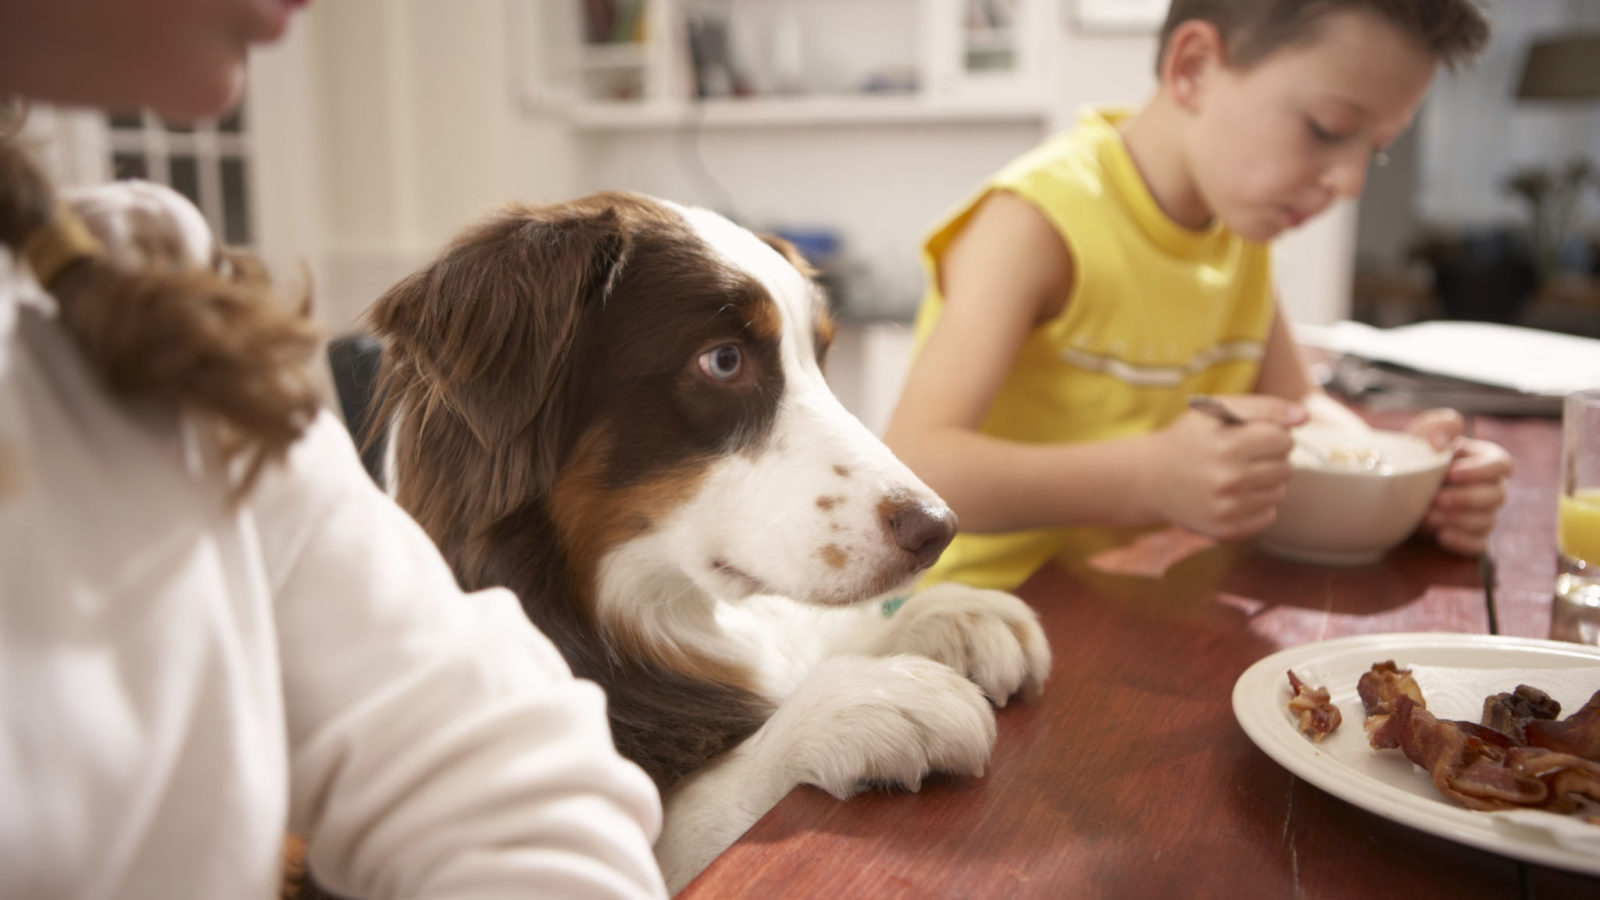 Dog at kitchen table with family